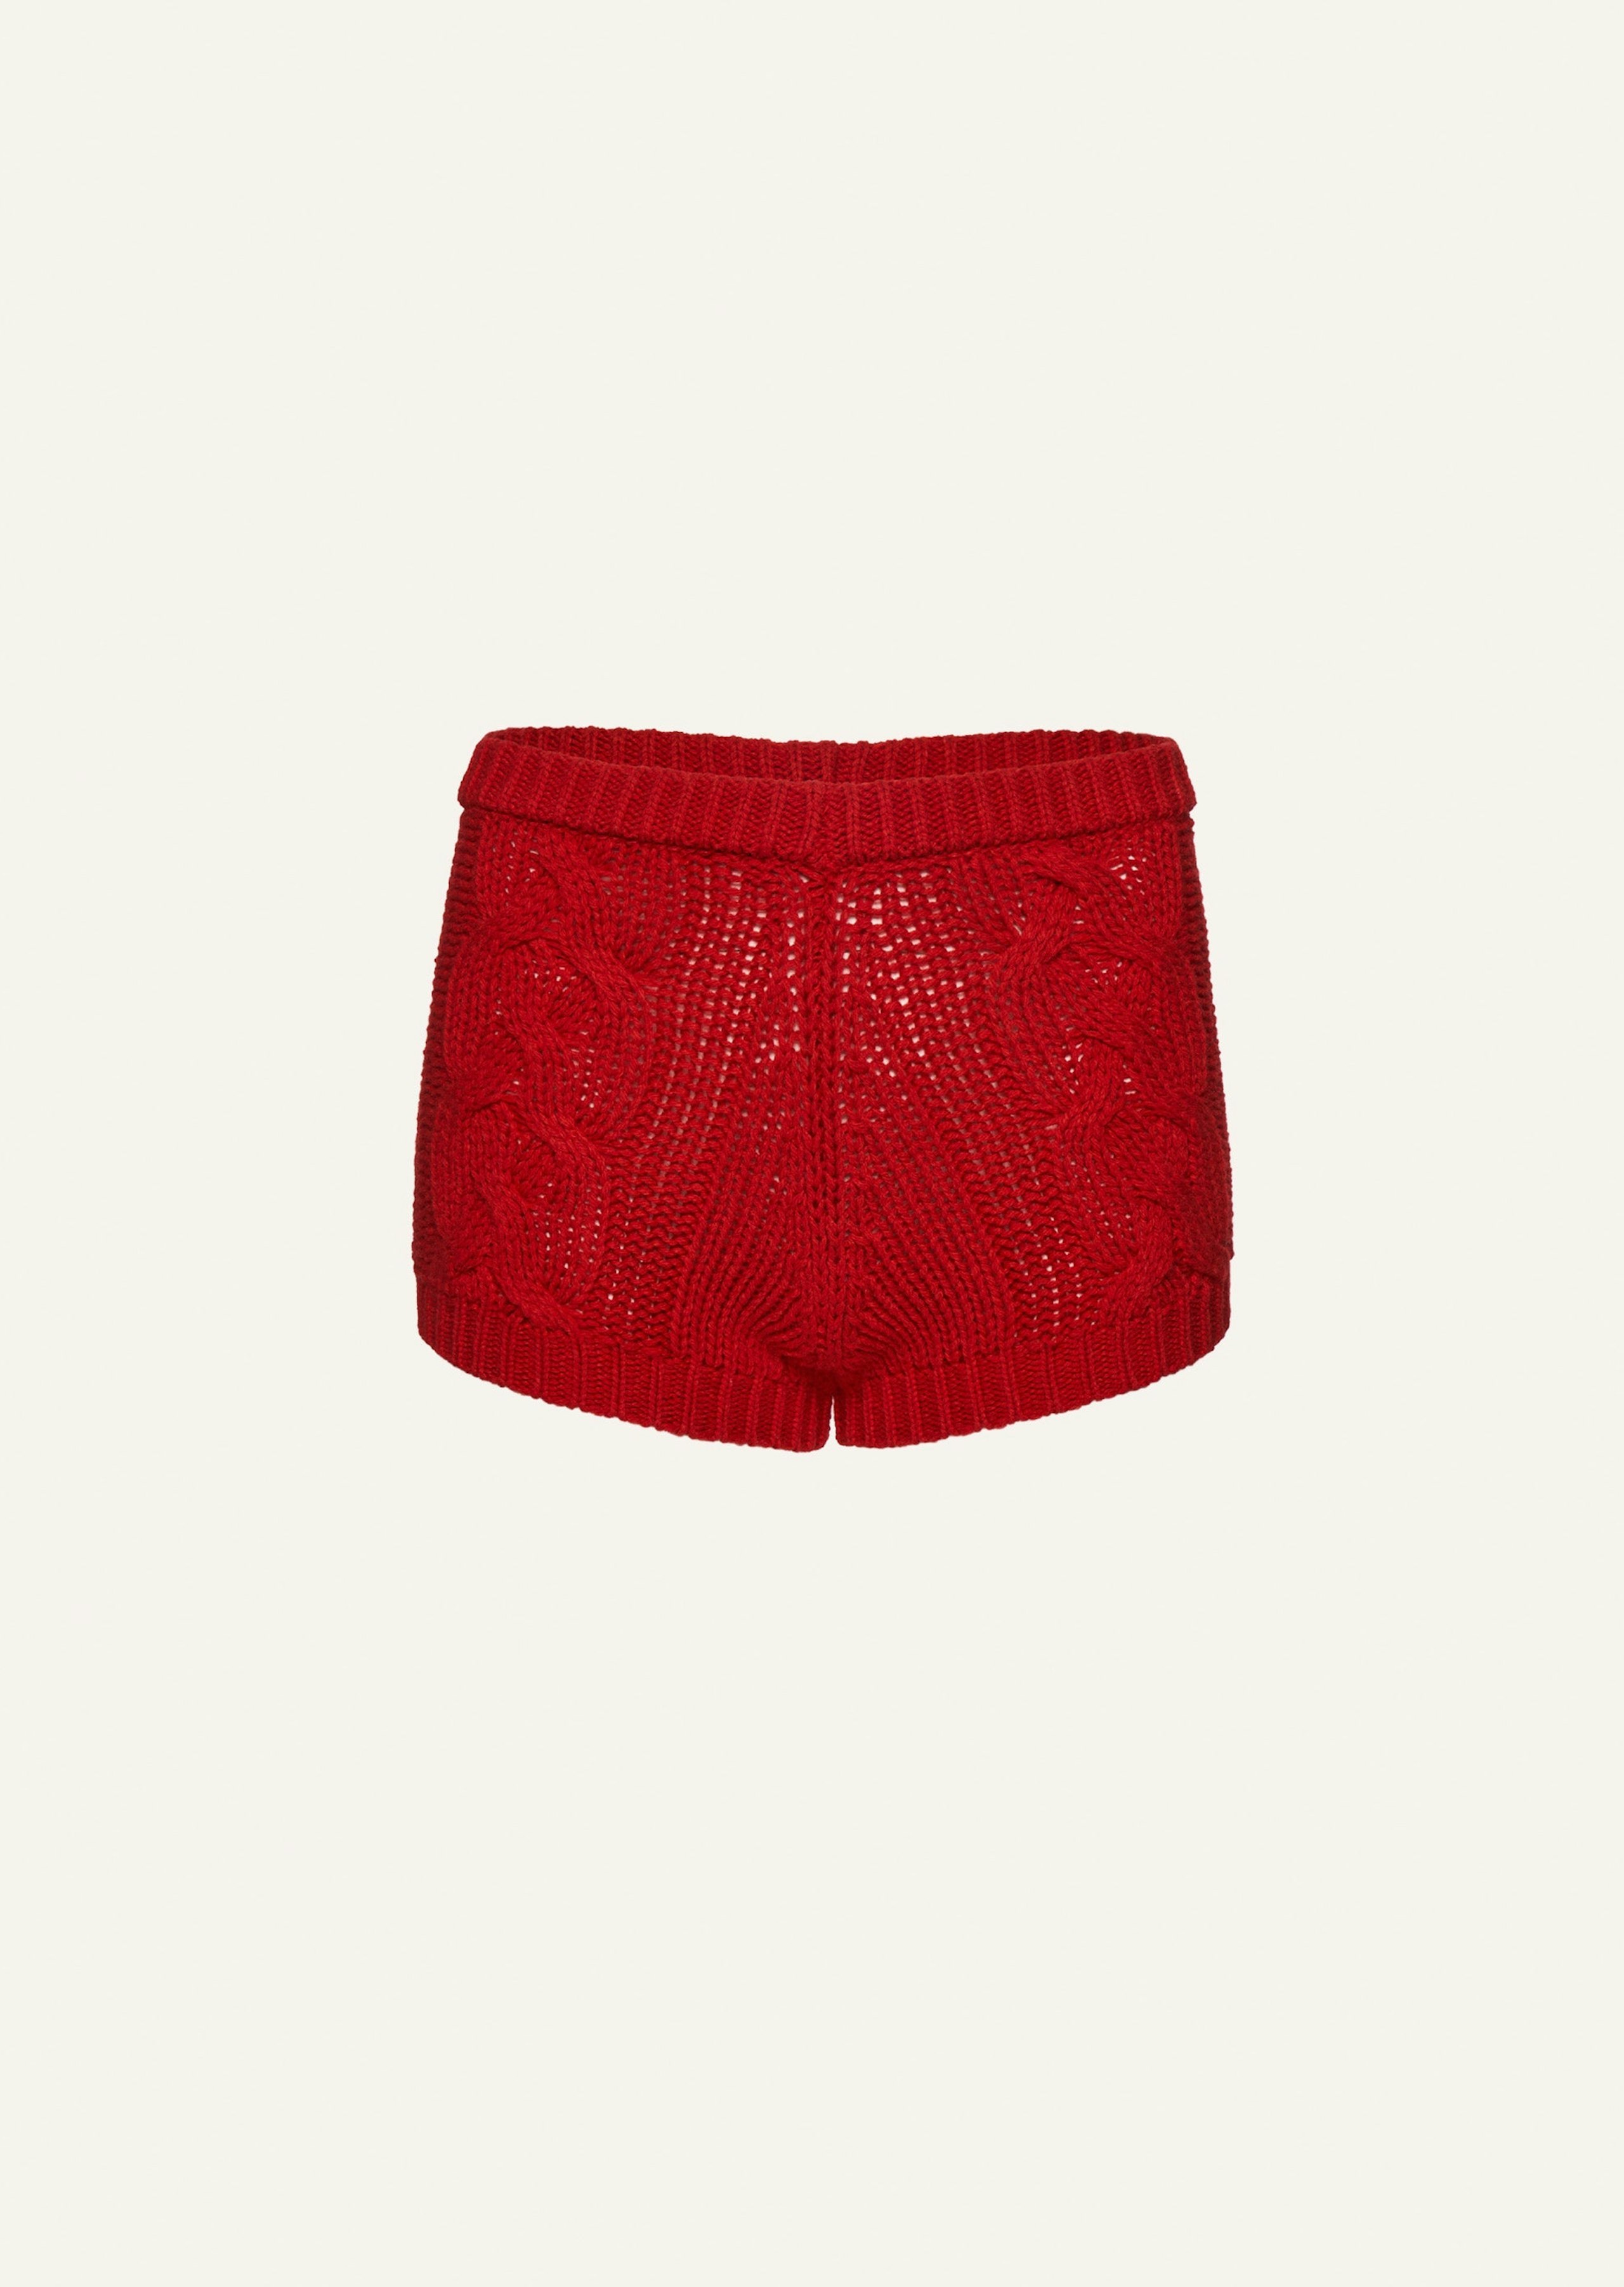 AW22 KNITWEAR 12 SHORTS RED